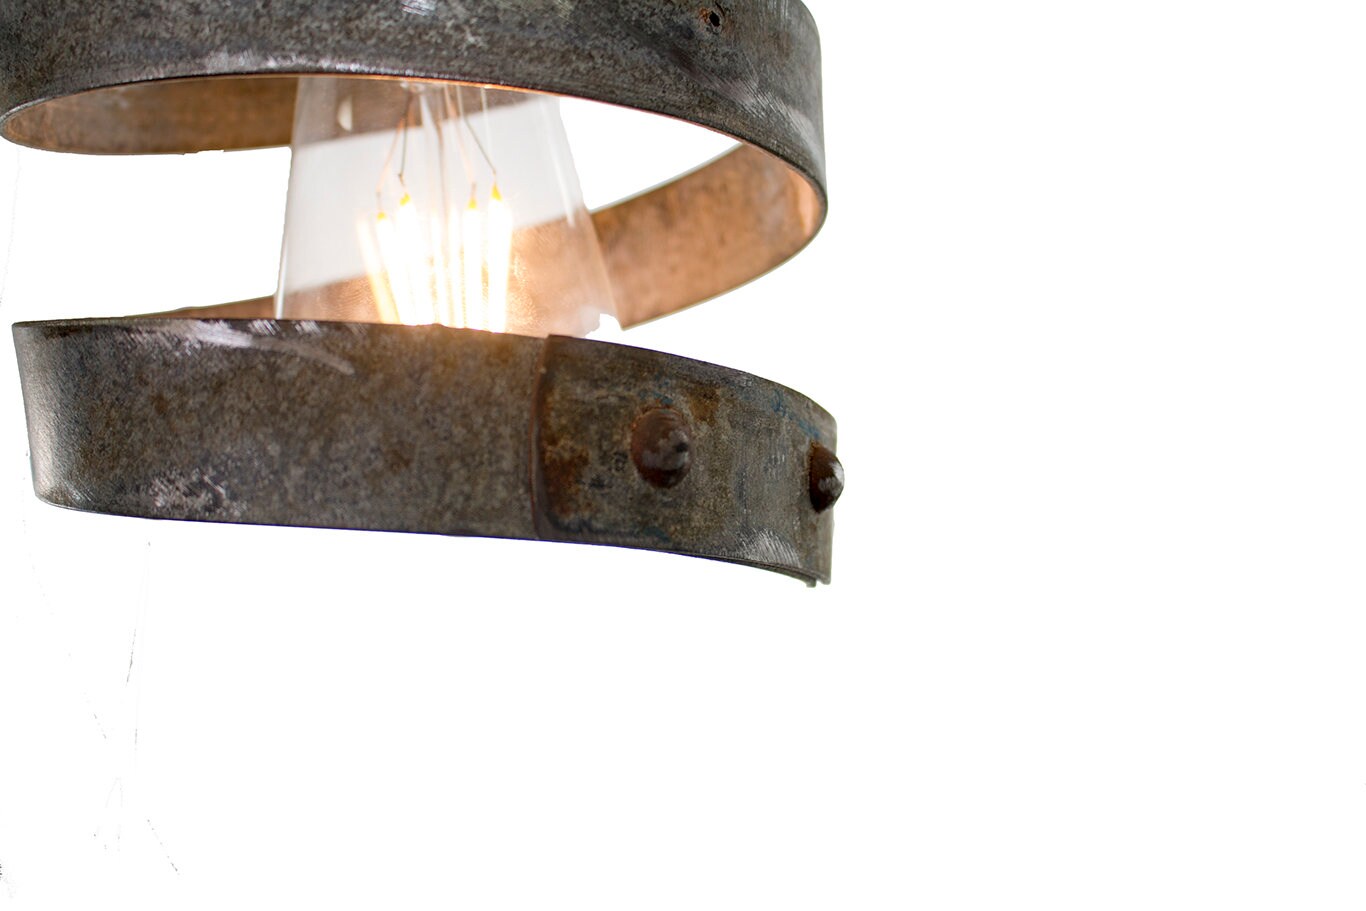 Wine Barrel Ring Pendant Light - Tohatra - Made from retired California wine barrel rings. 100% Recycled!